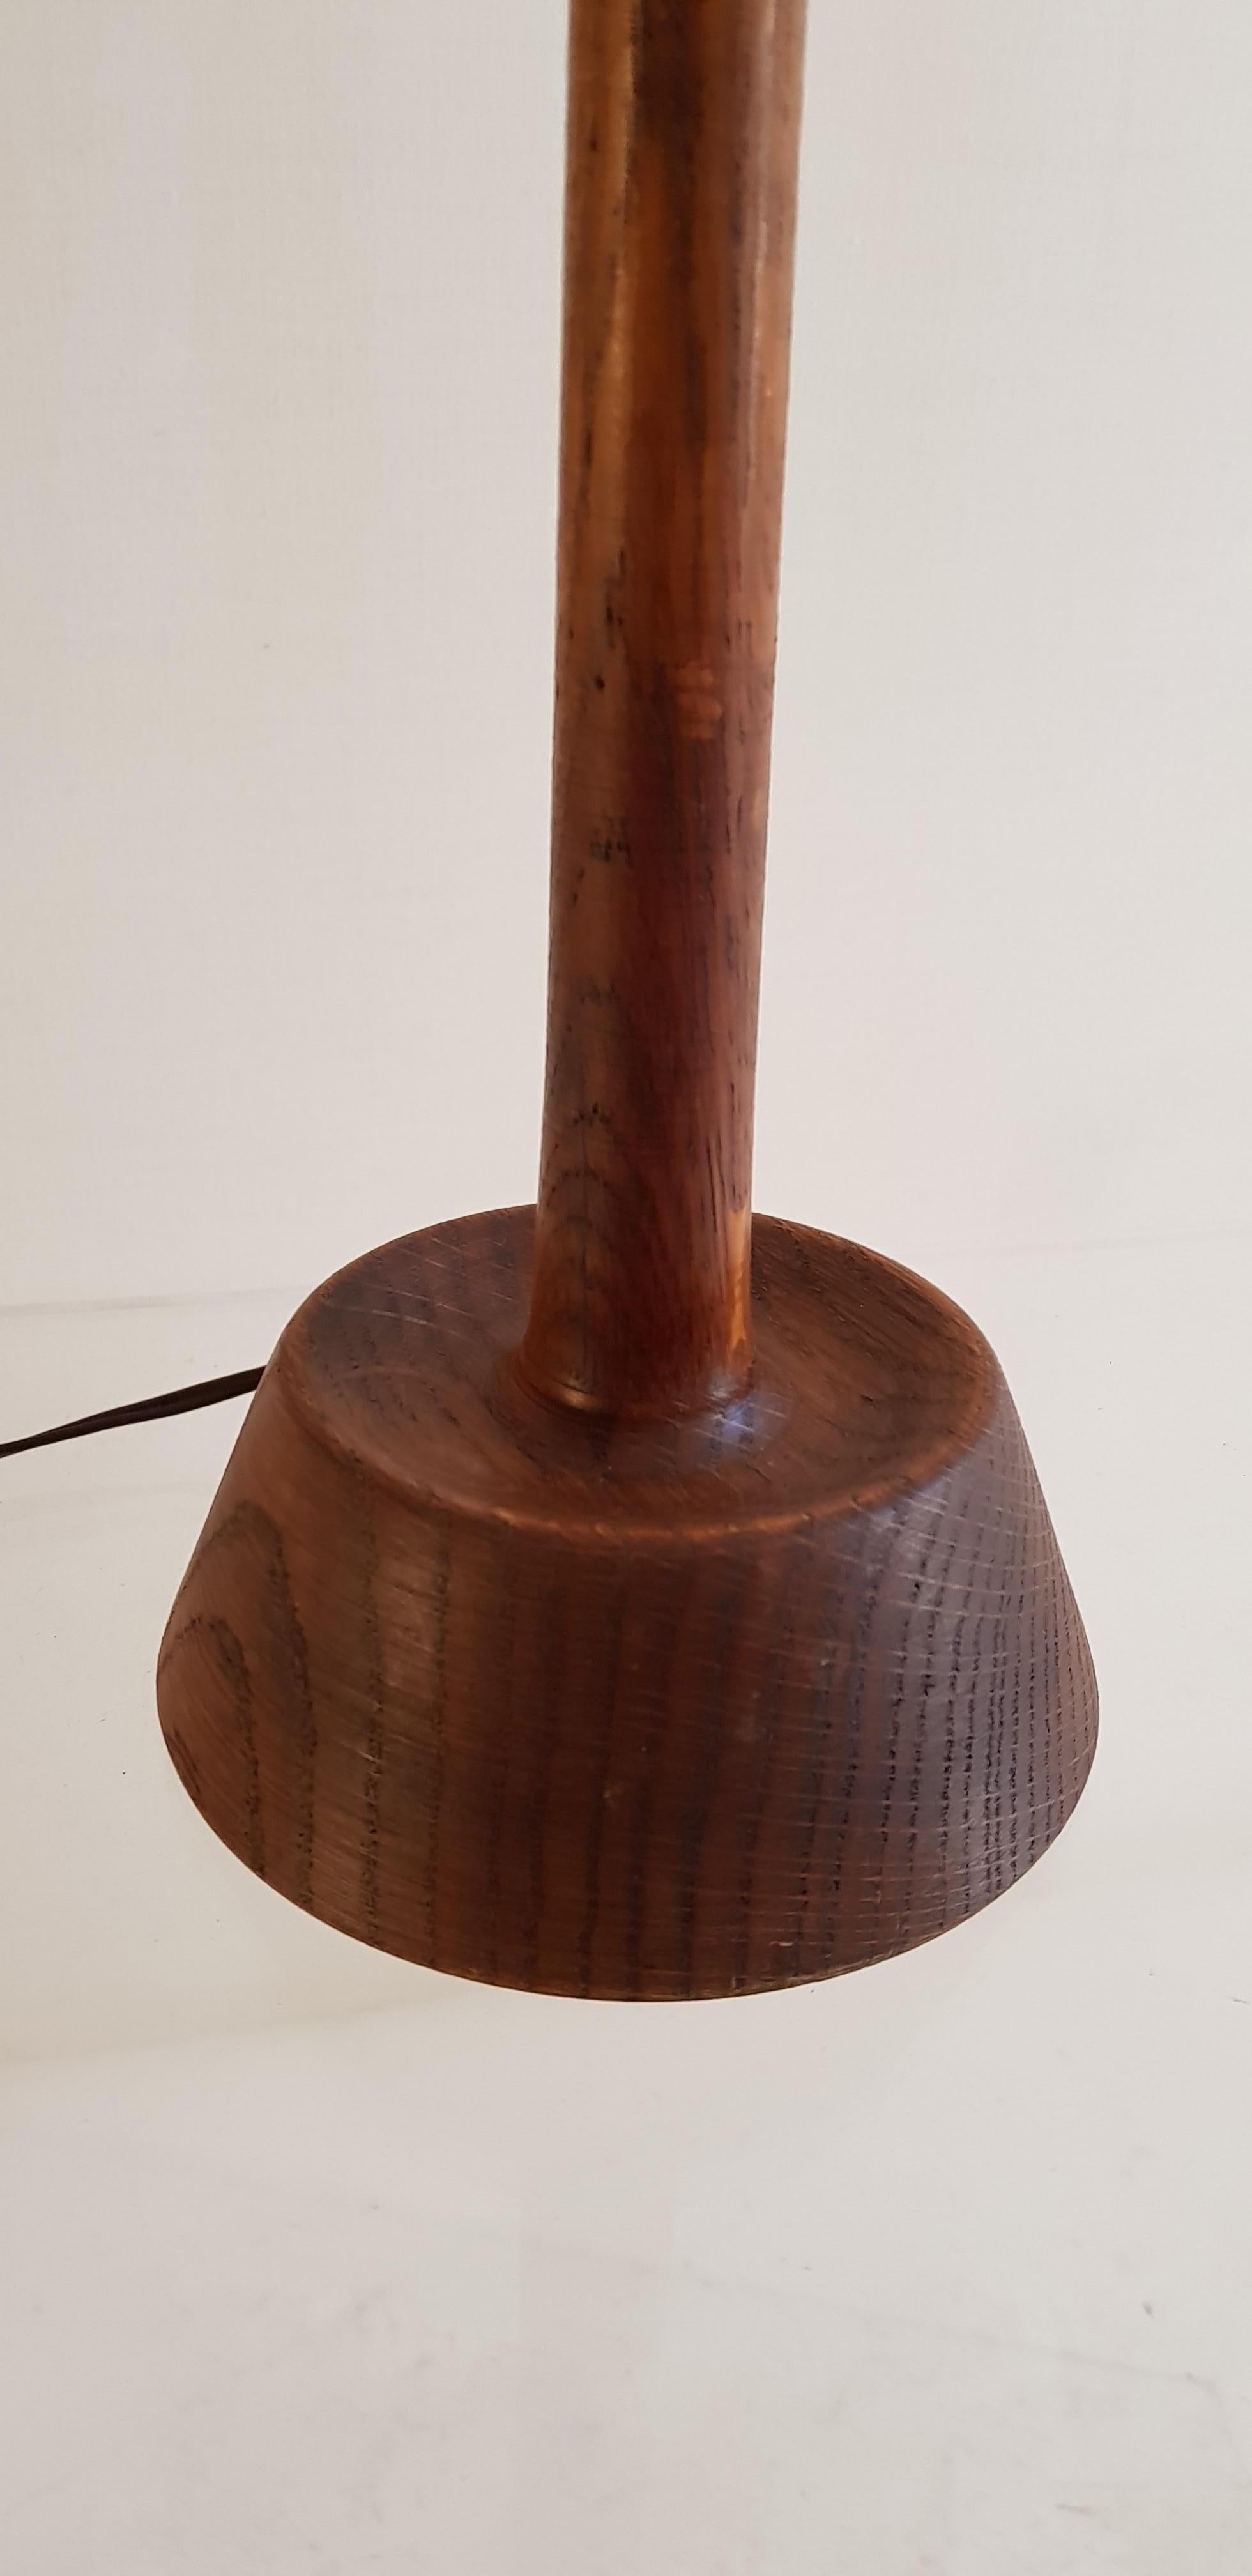 Table lamp designed by Uno and Östen Kristiansson for Luxus in Vittsjö, Sweden during the 1950s.
Solid oak base and shade in white cotton. Signed with label. In great condition without chipping or cracks.